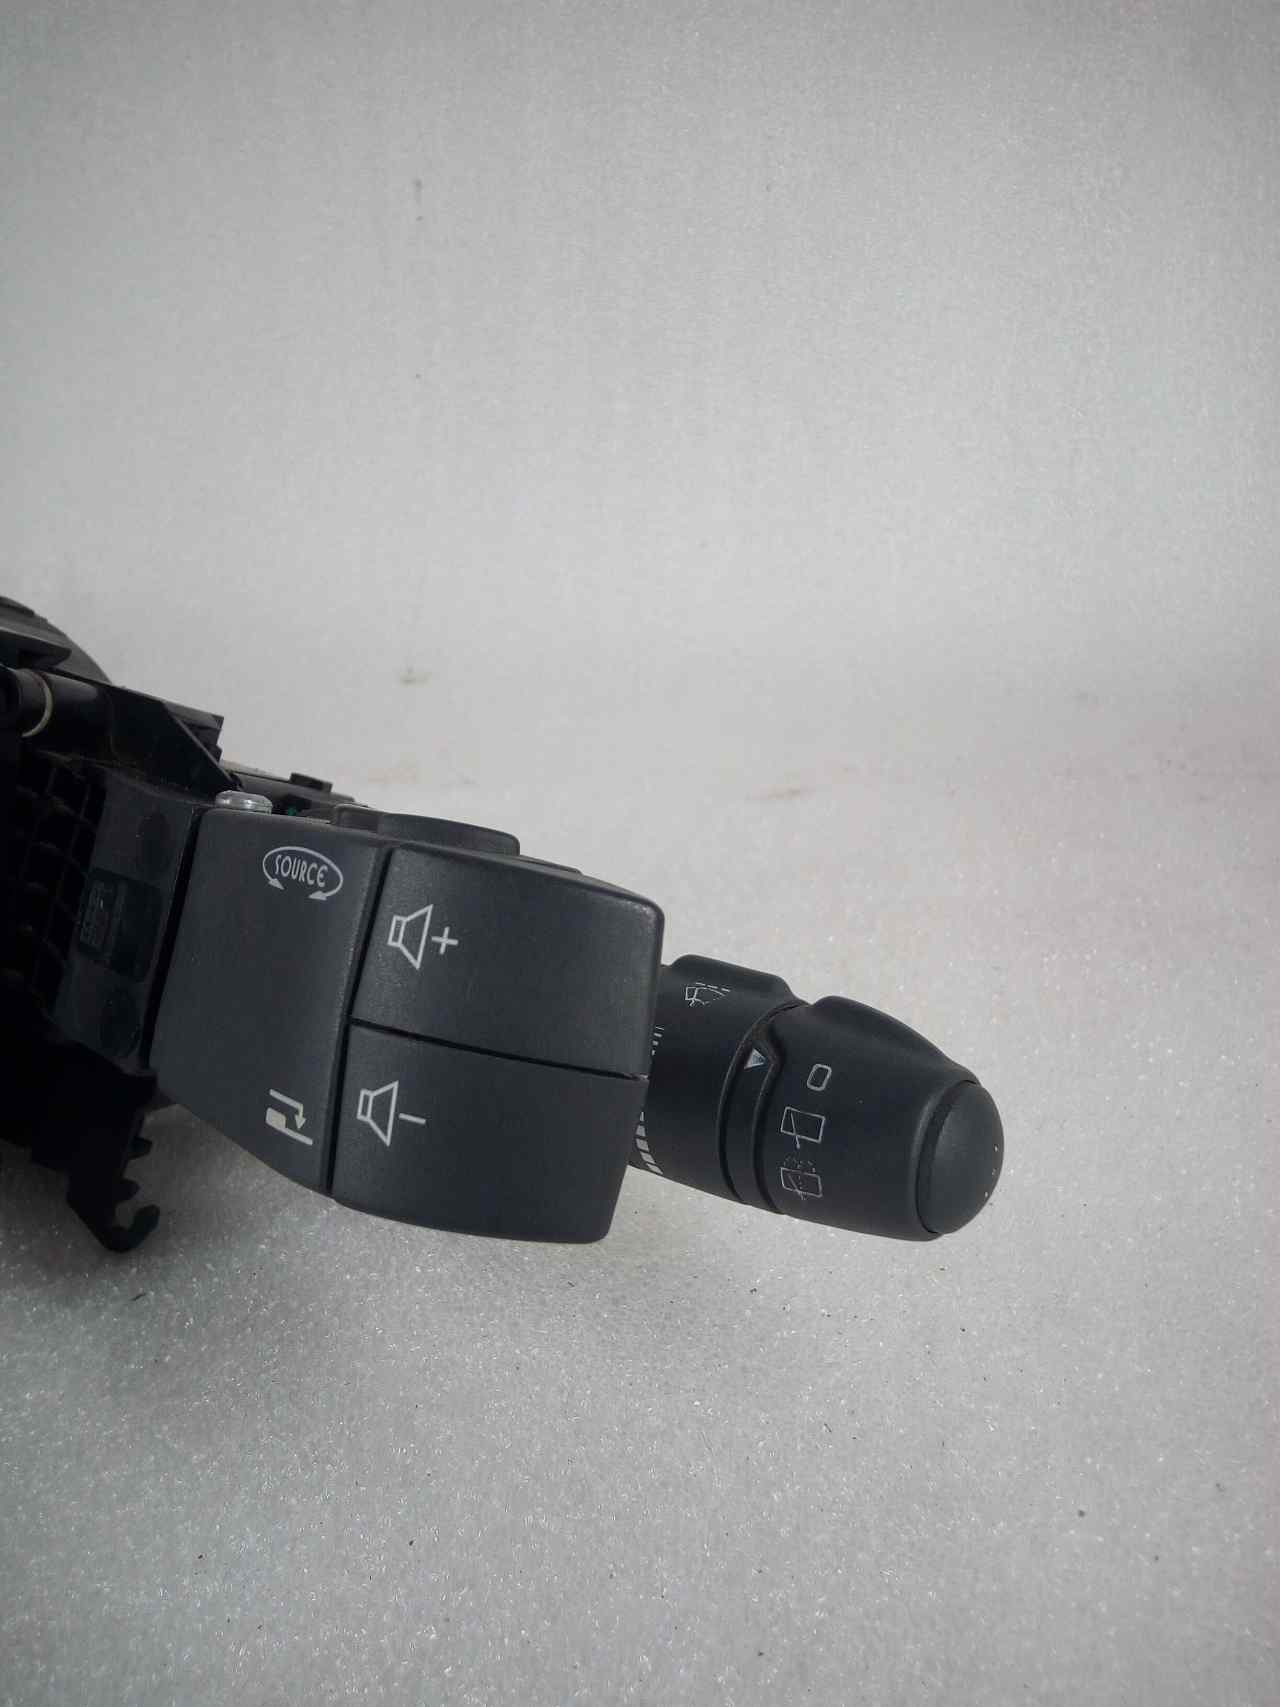 RENAULT Espace 4 generation (2002-2014) Switches 8200012244 20066839